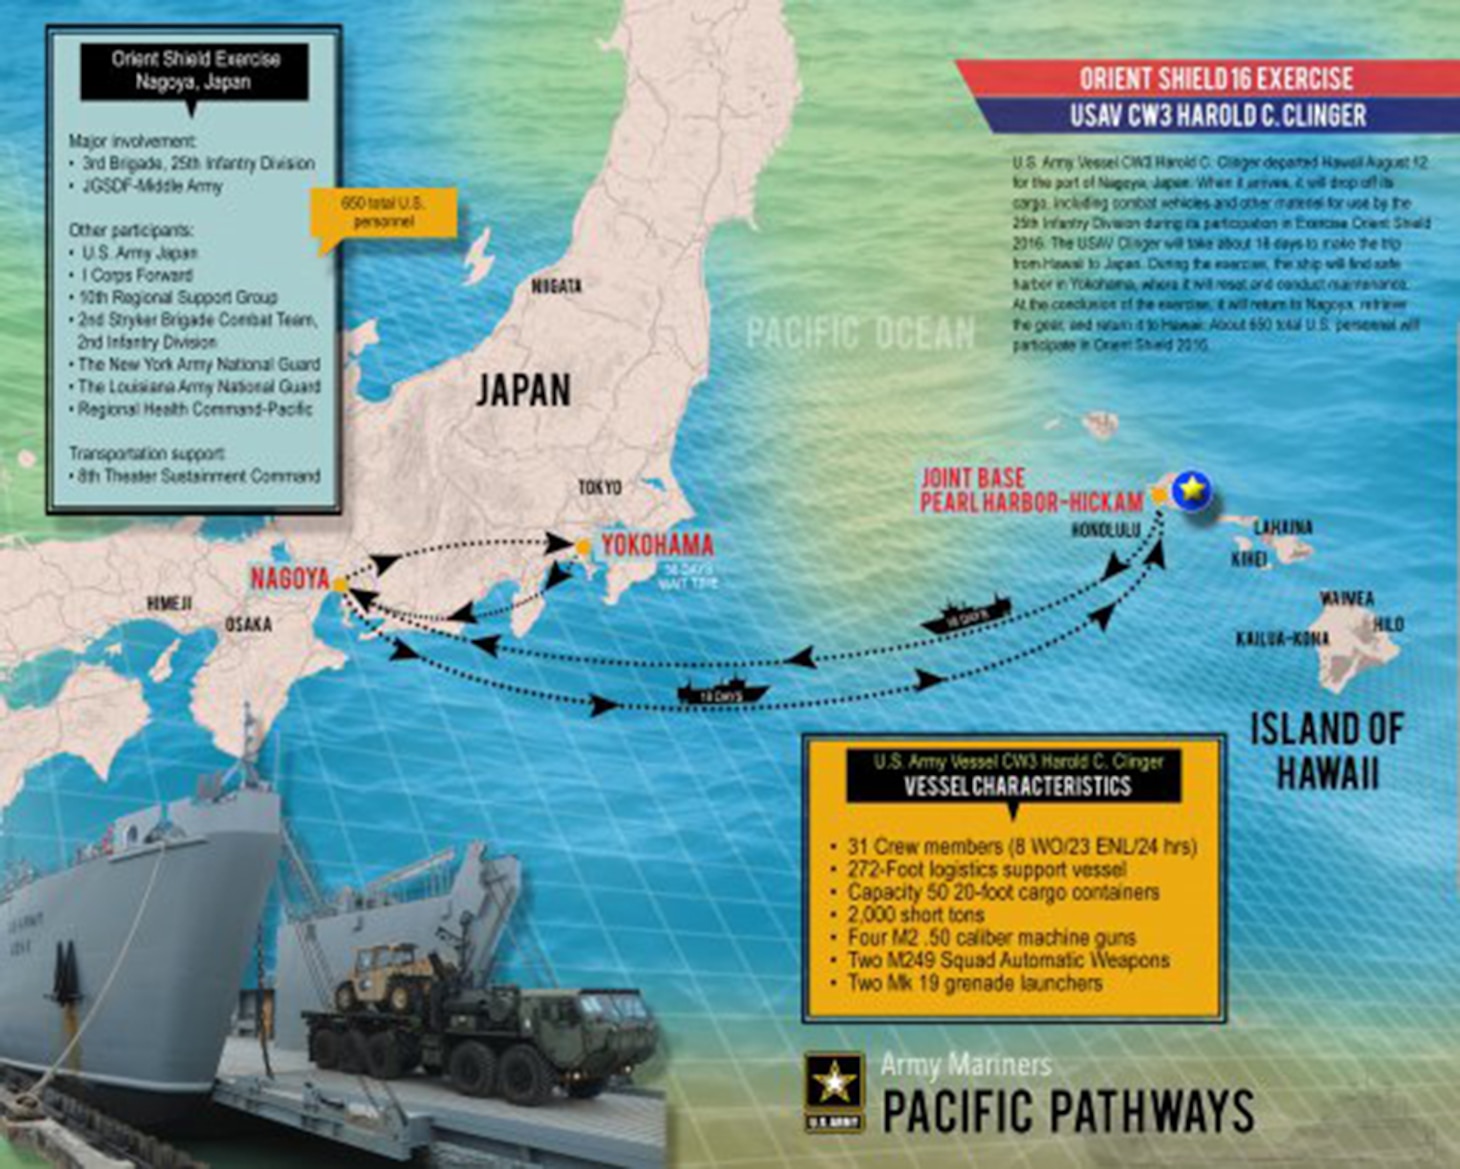 Army mariners set sail for Japan in support of Pacific Pathways. 